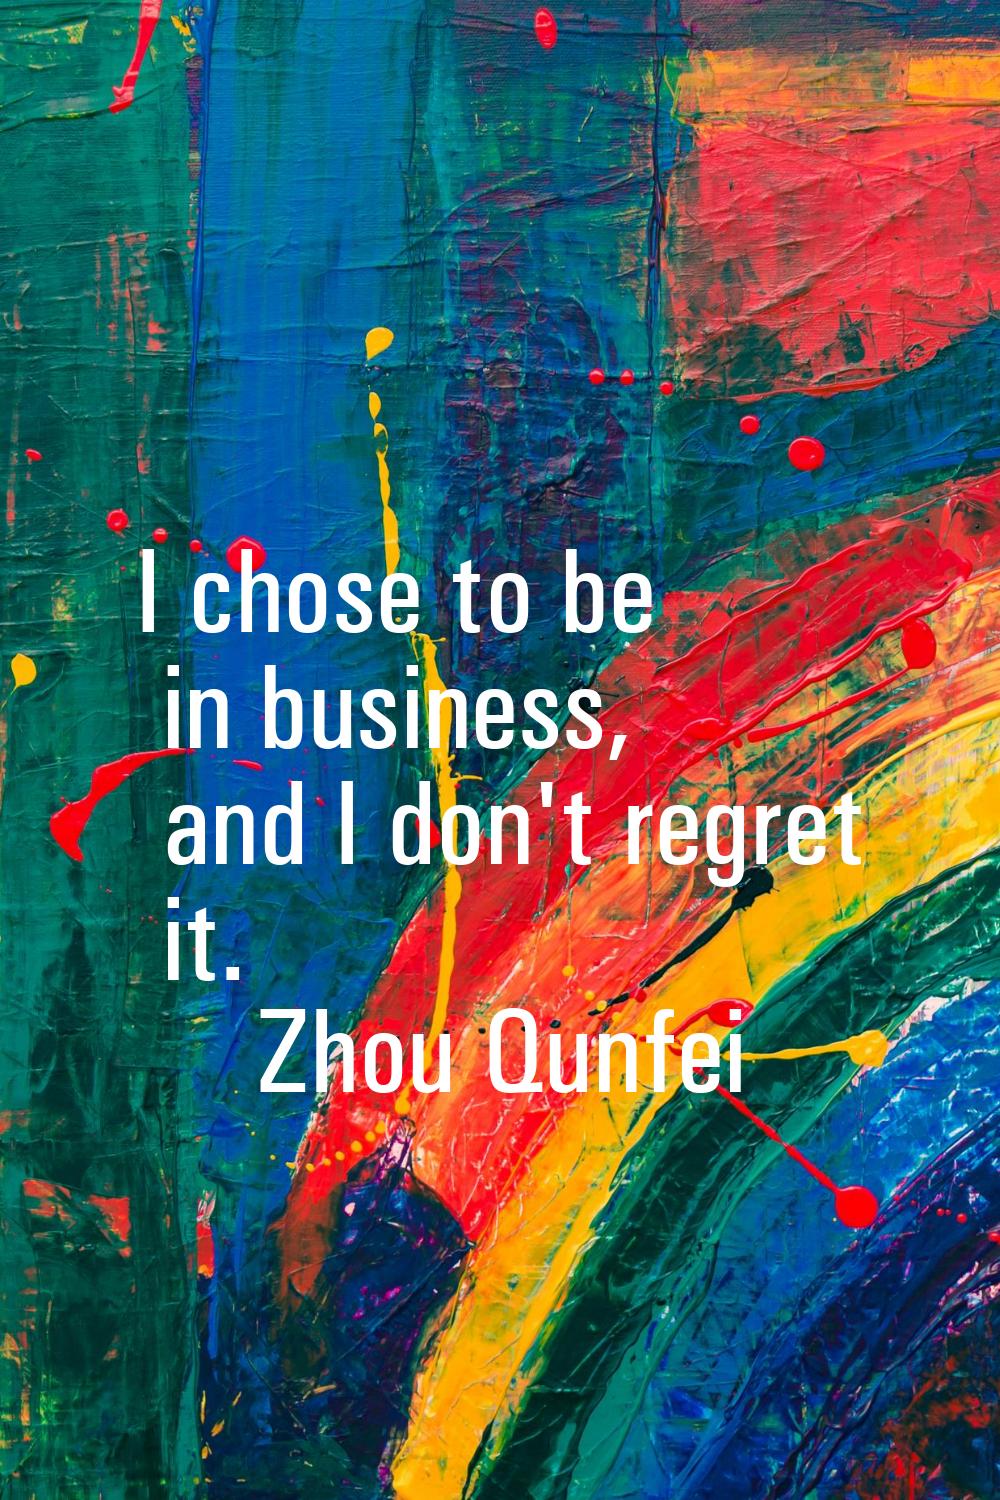 I chose to be in business, and I don't regret it.